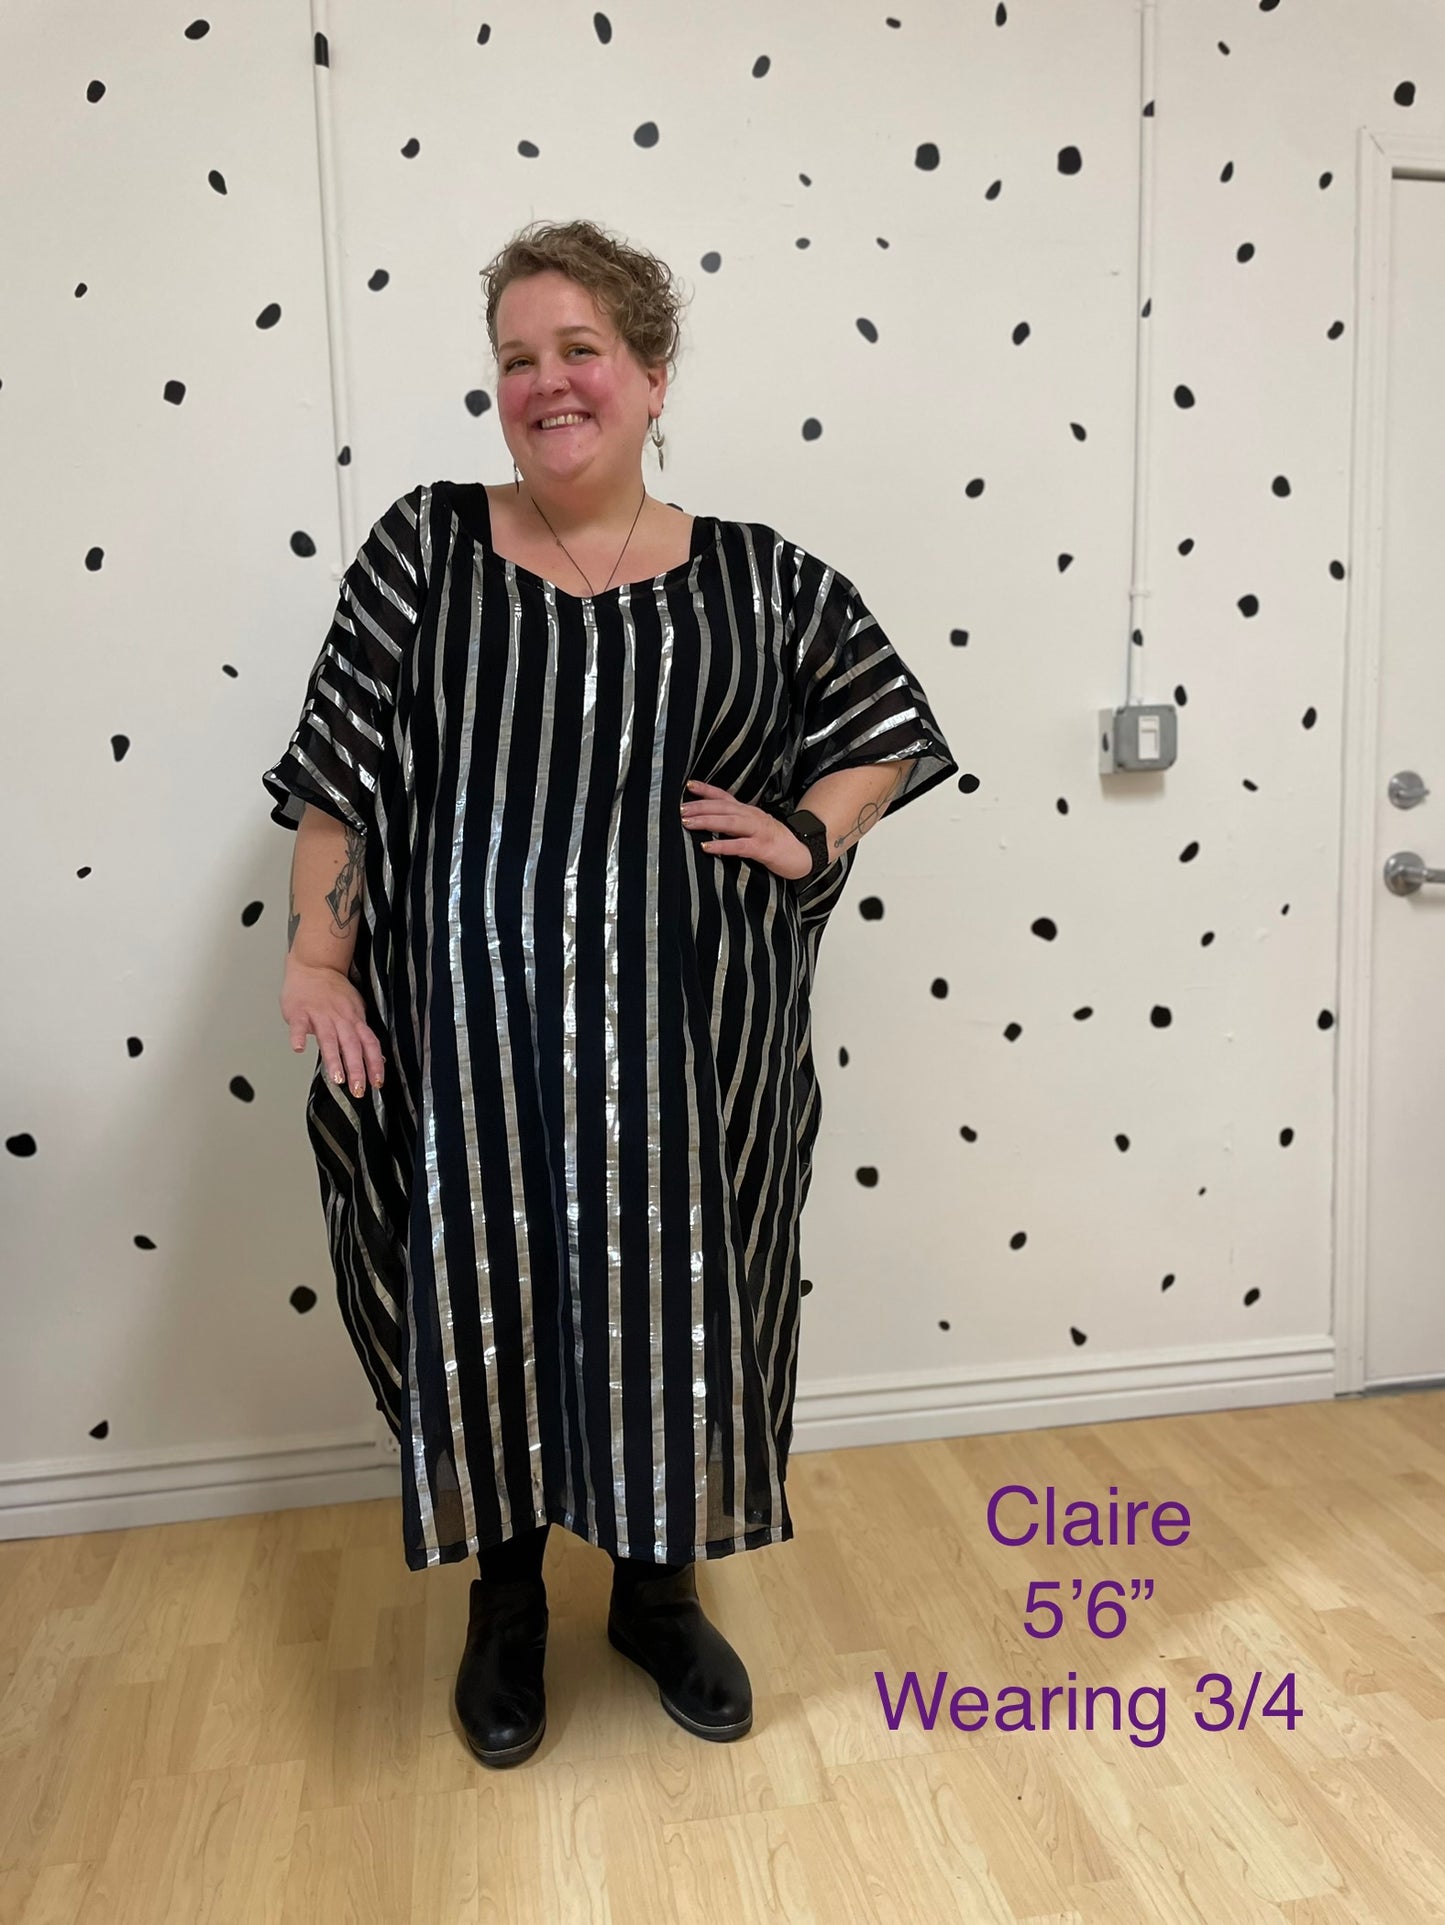 Black and silver striped kaftan showing the model in a size 3/4